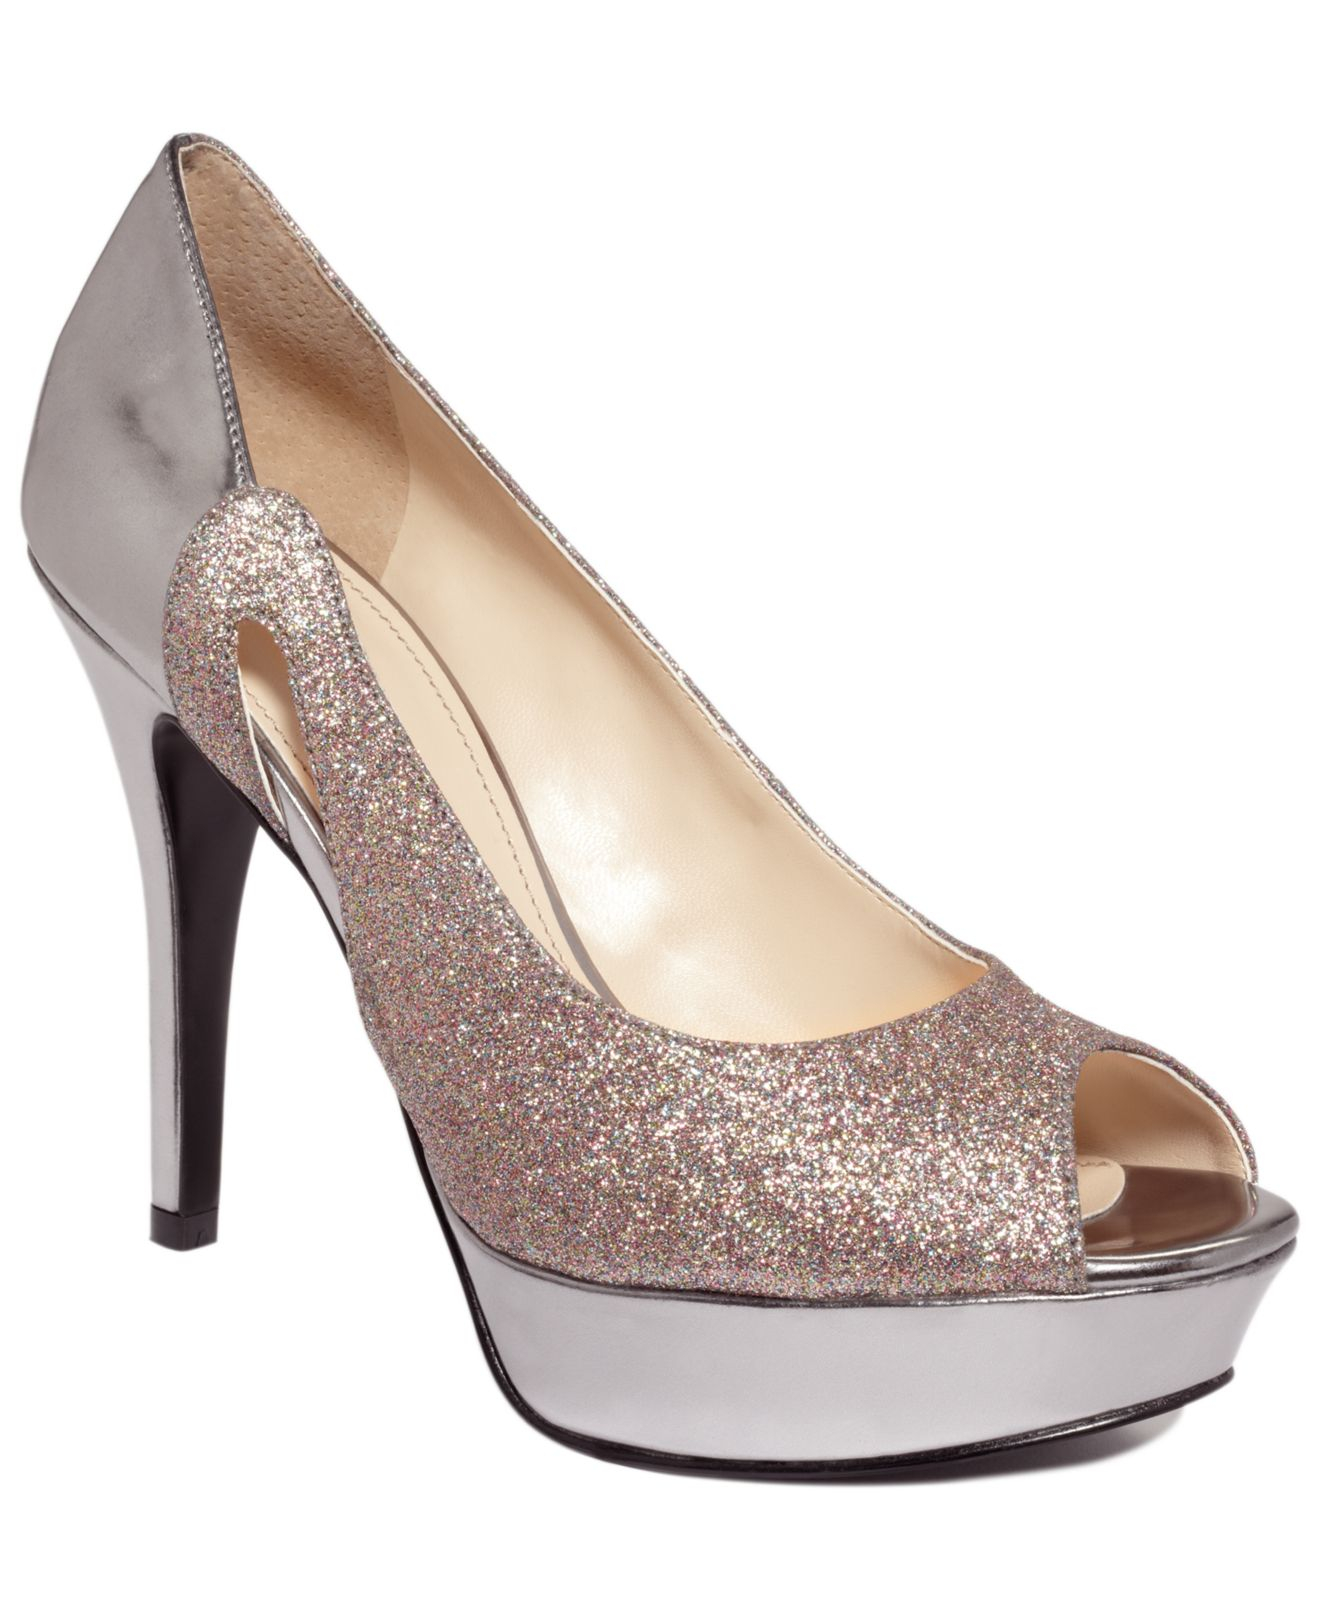 Marc Fisher Tumble Platform Pumps in 